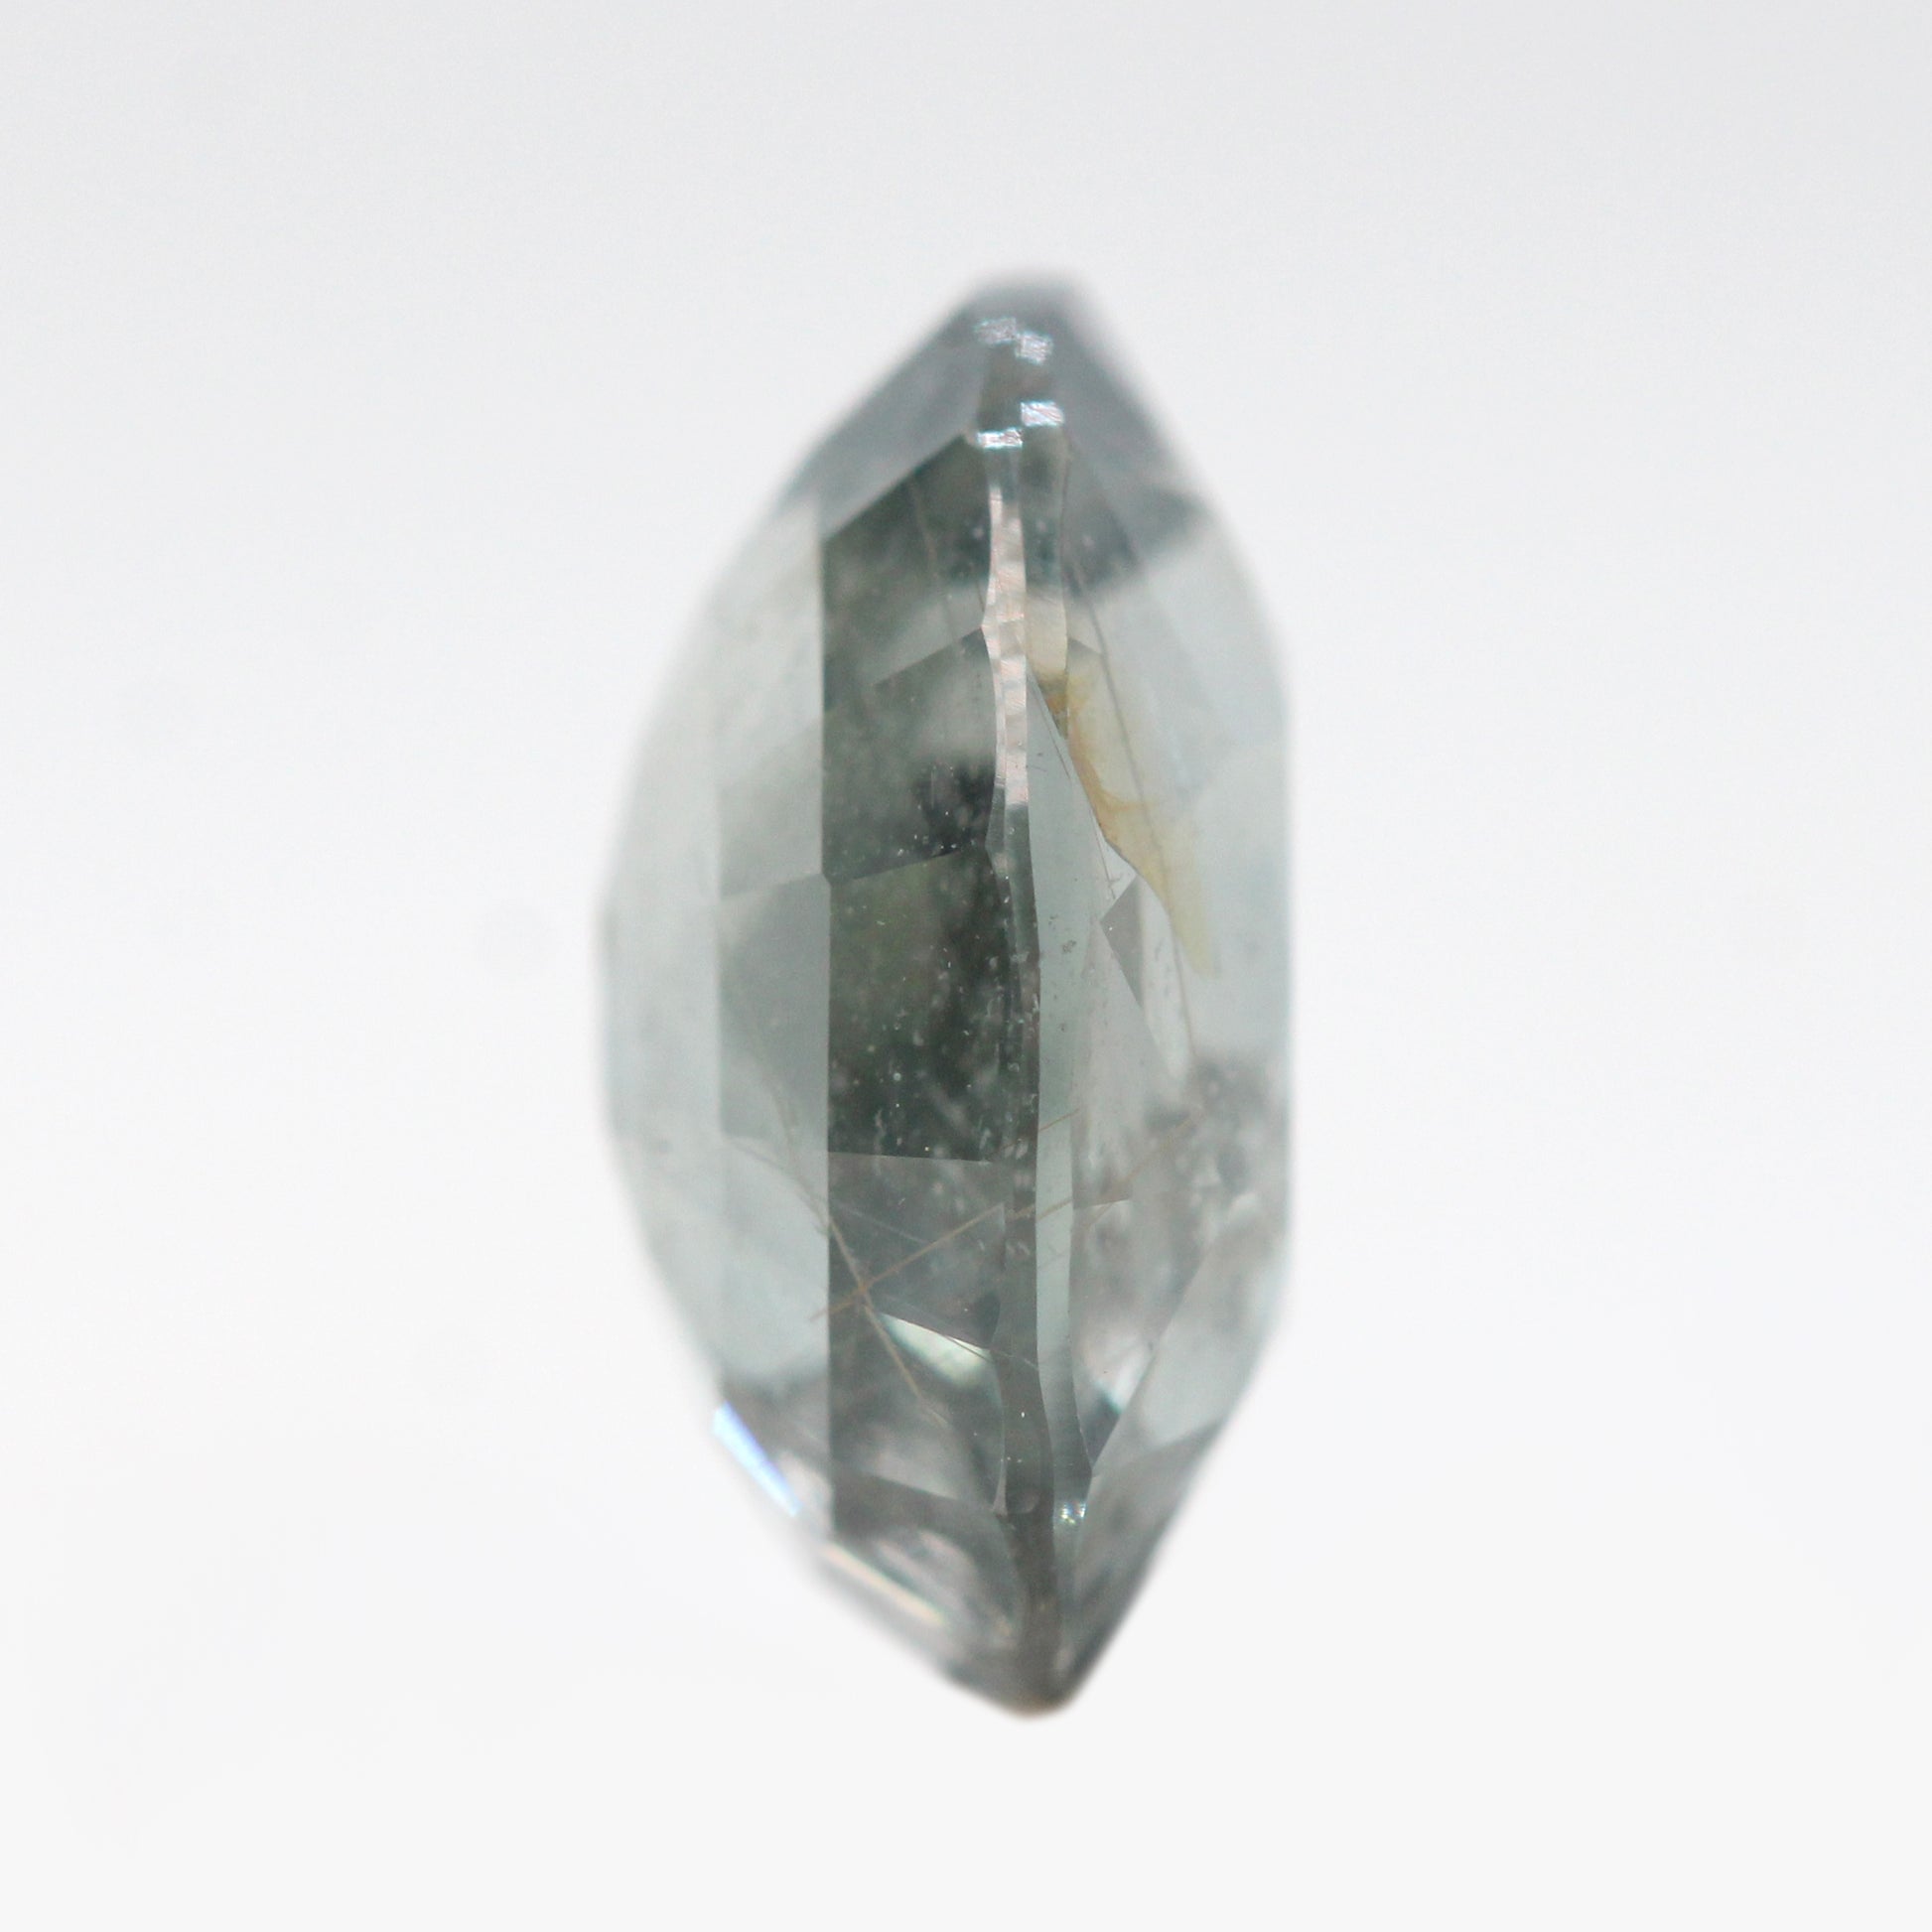 4.93 Carat Clear Earthy Gray Oval Sapphire for Custom Work - Inventory Code GOS493 - Midwinter Co. Alternative Bridal Rings and Modern Fine Jewelry